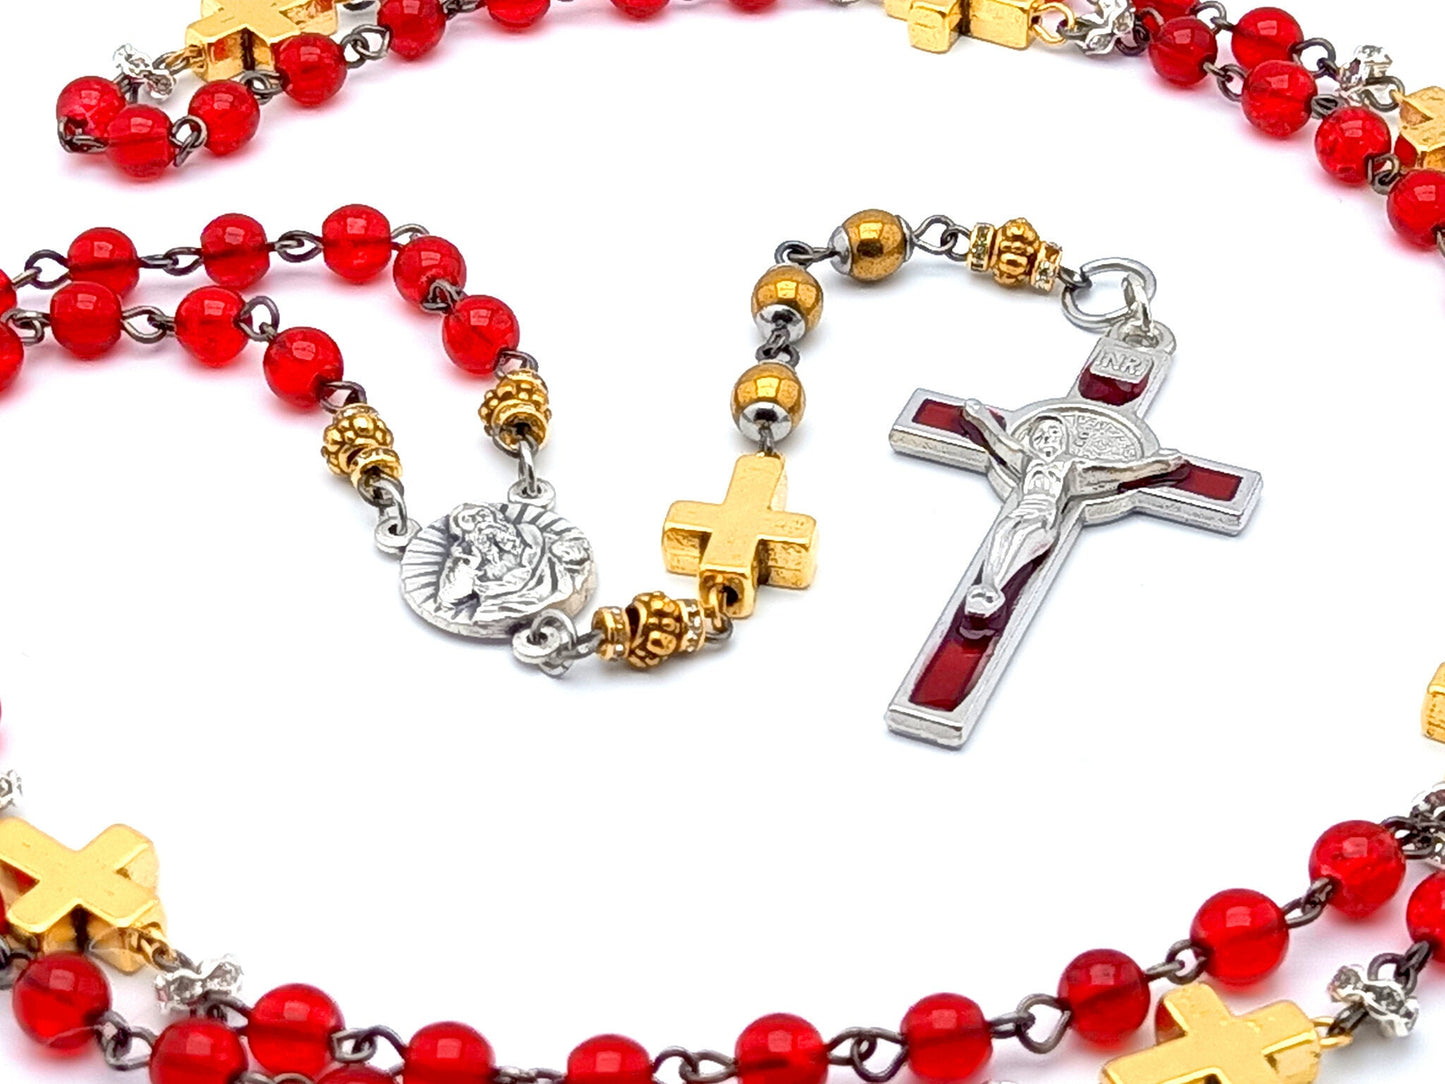 God the Father unique rosary beads prayer chaplet with red glass and gold beads, red enamel and silver crucifix and centre medal.